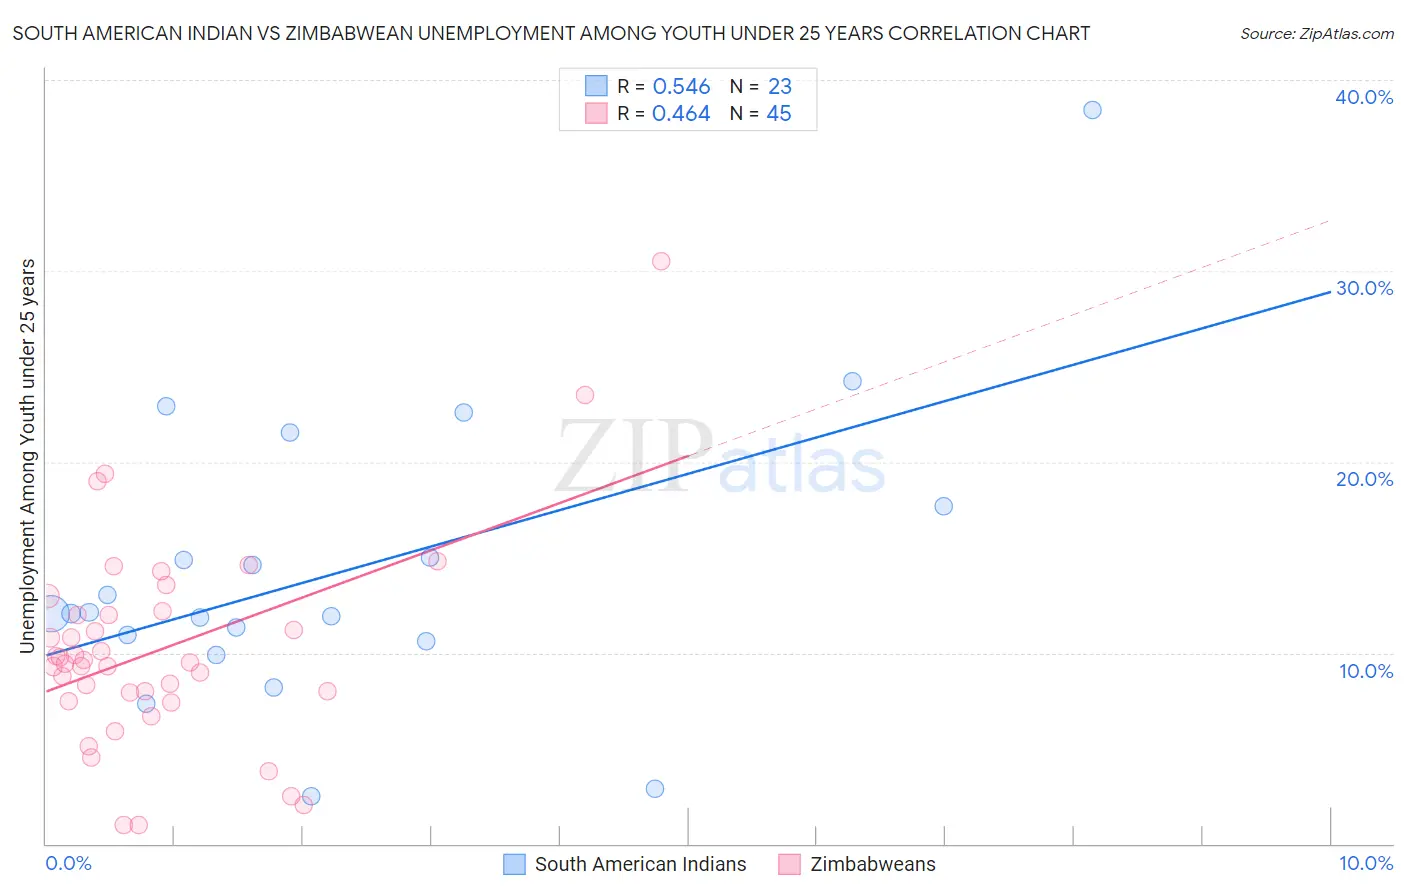 South American Indian vs Zimbabwean Unemployment Among Youth under 25 years